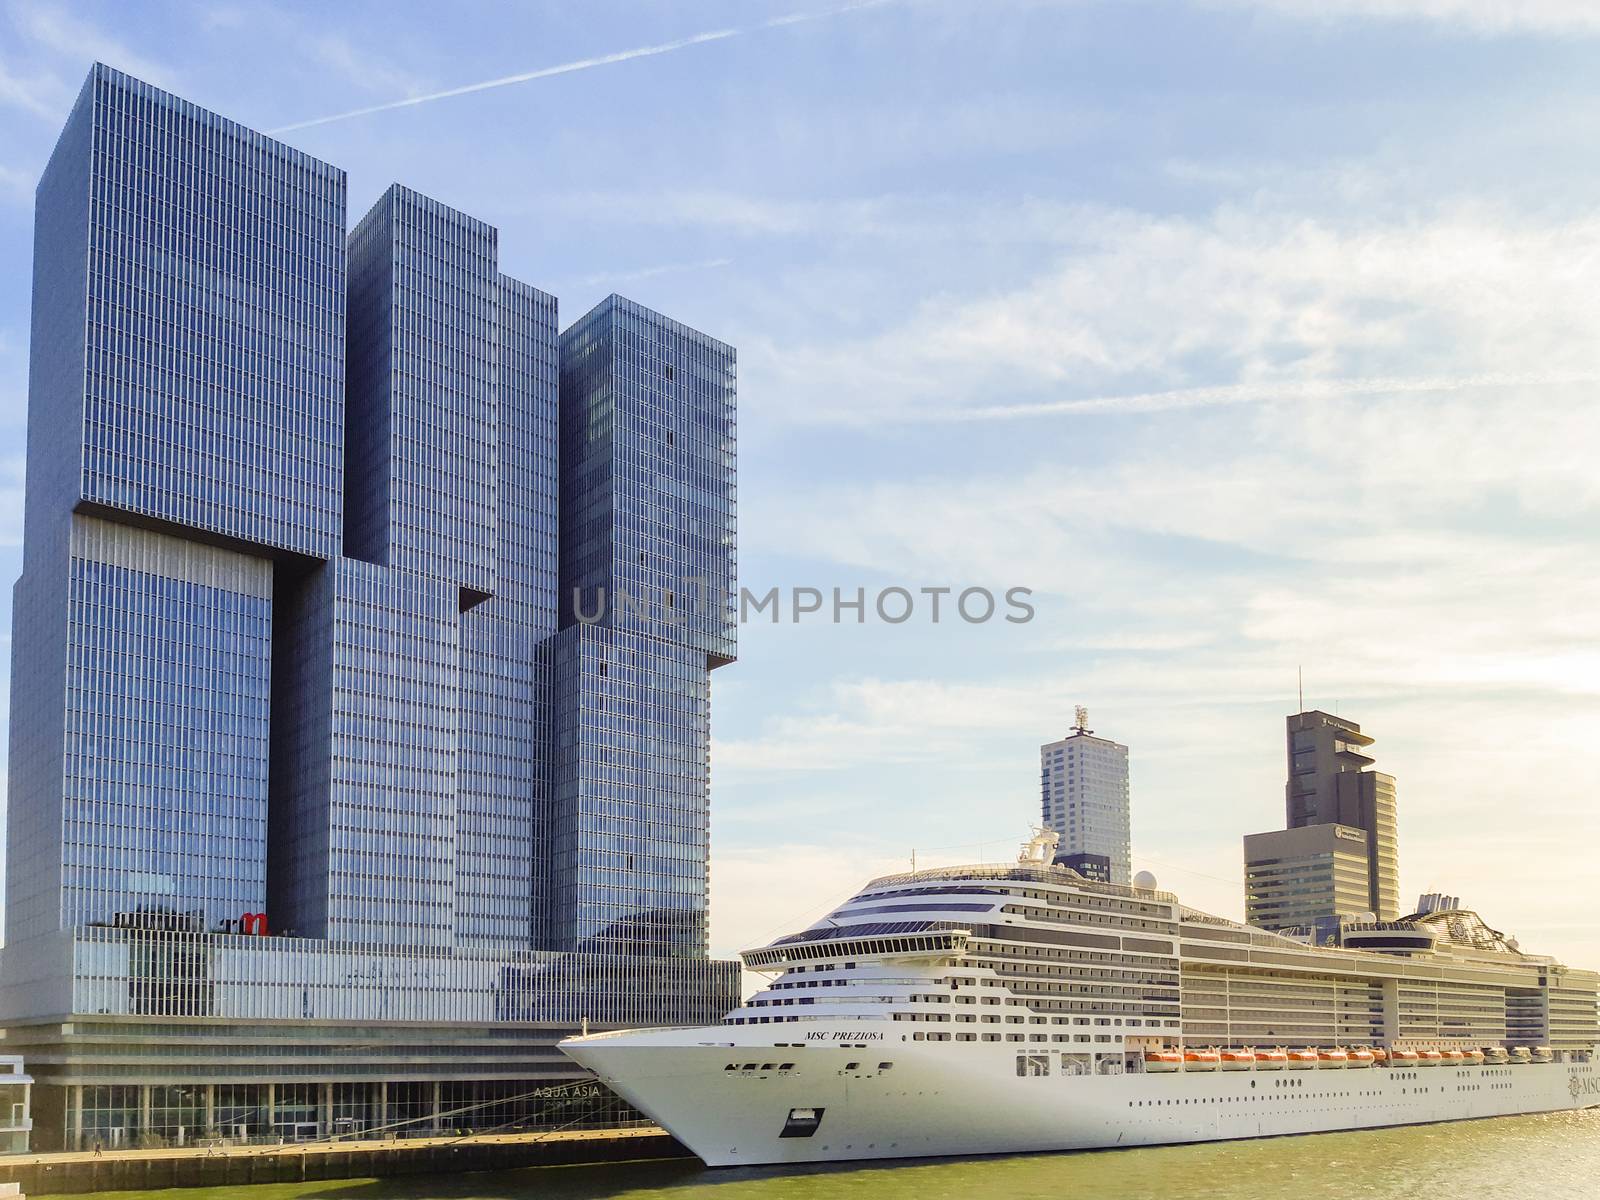 Cruise ship MSC Preziosa at Wilhelminapier with De Rotterdam business towers. Travel and toursim in Netherlands